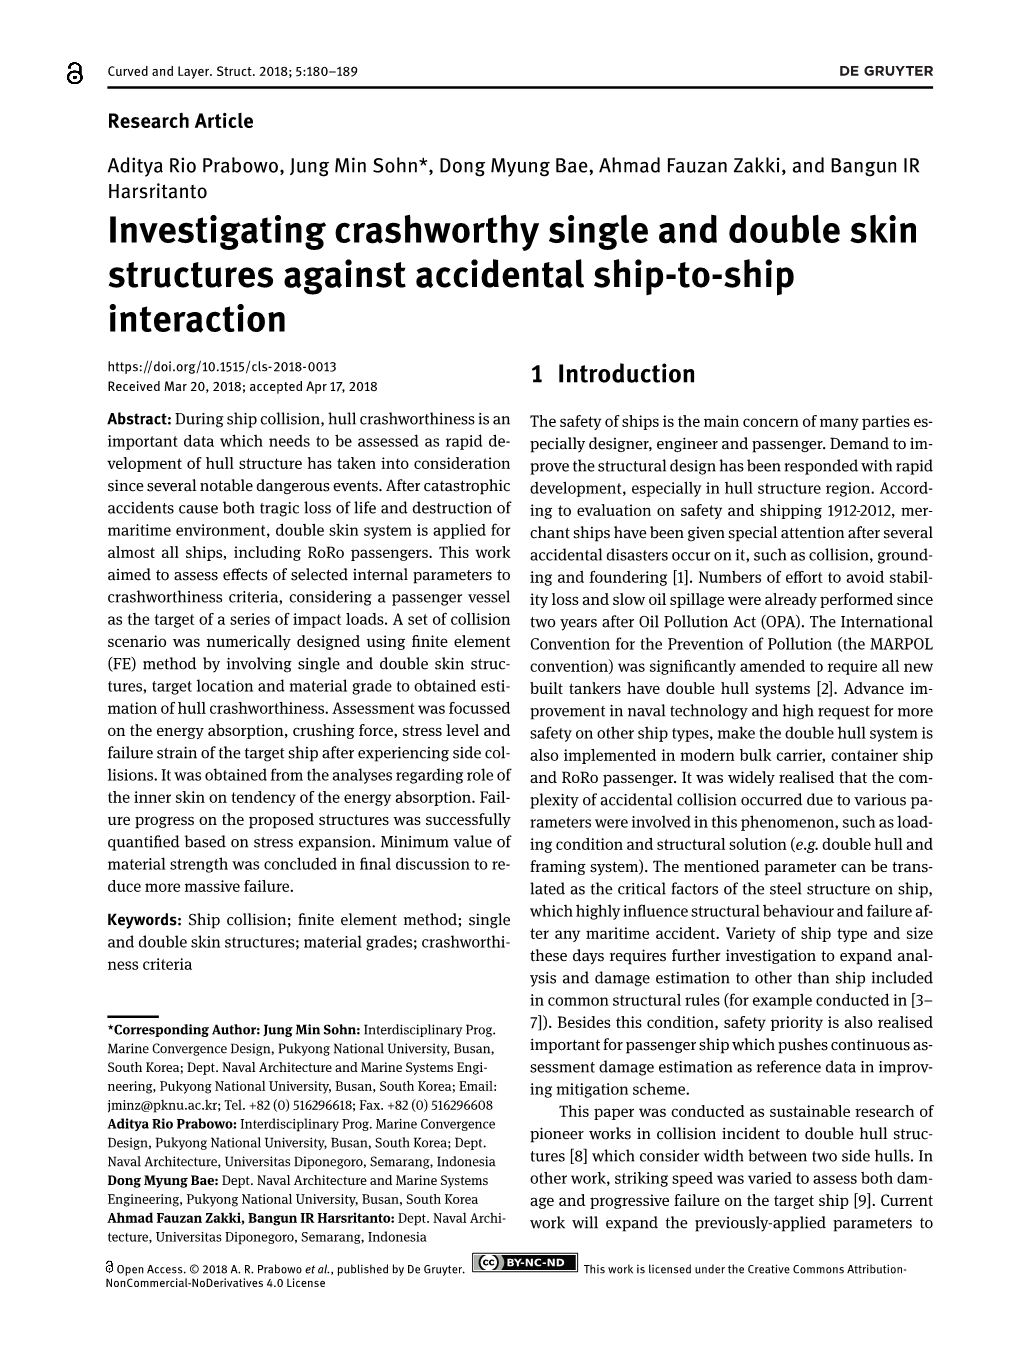 Investigating Crashworthy Single and Double Skin Structures Against